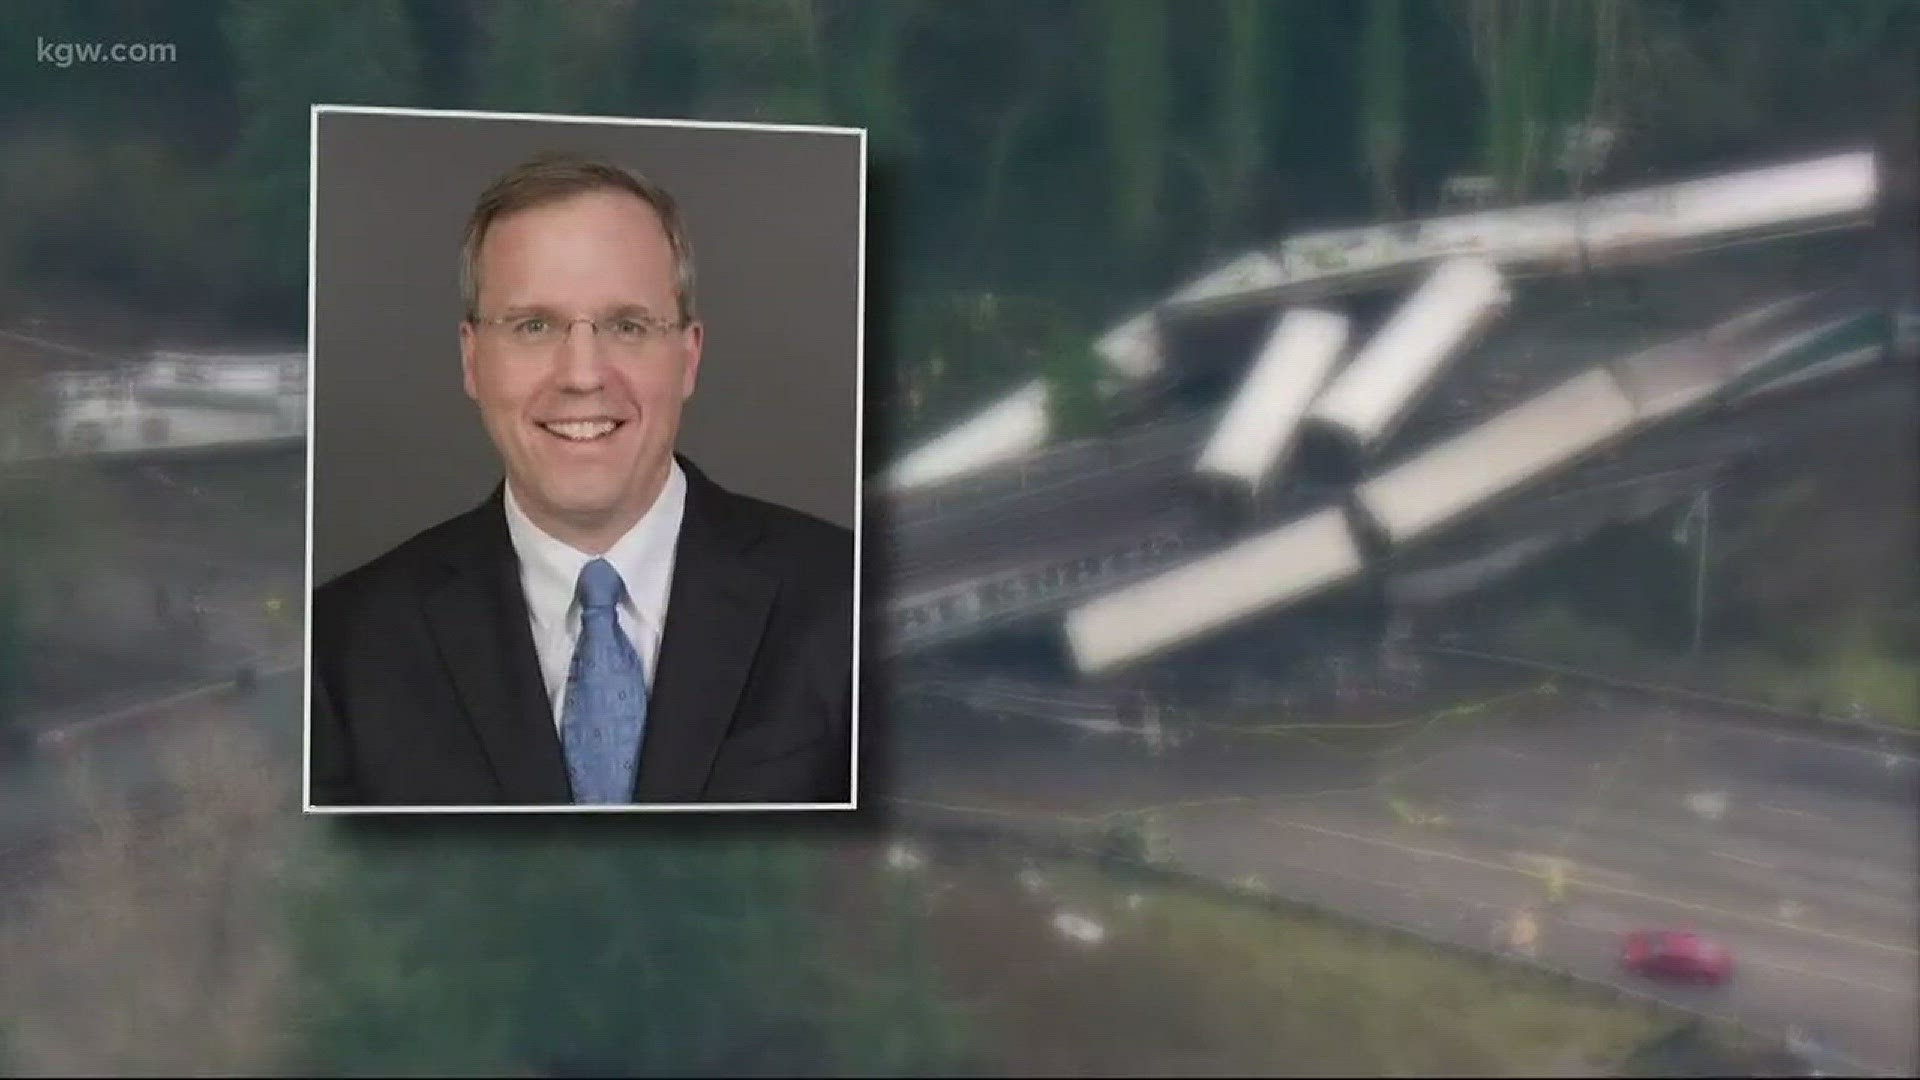 Doctor Nathan Selden, a neurosurgeon at OHSU, helped treat commuters who survived the Amtrak derailment